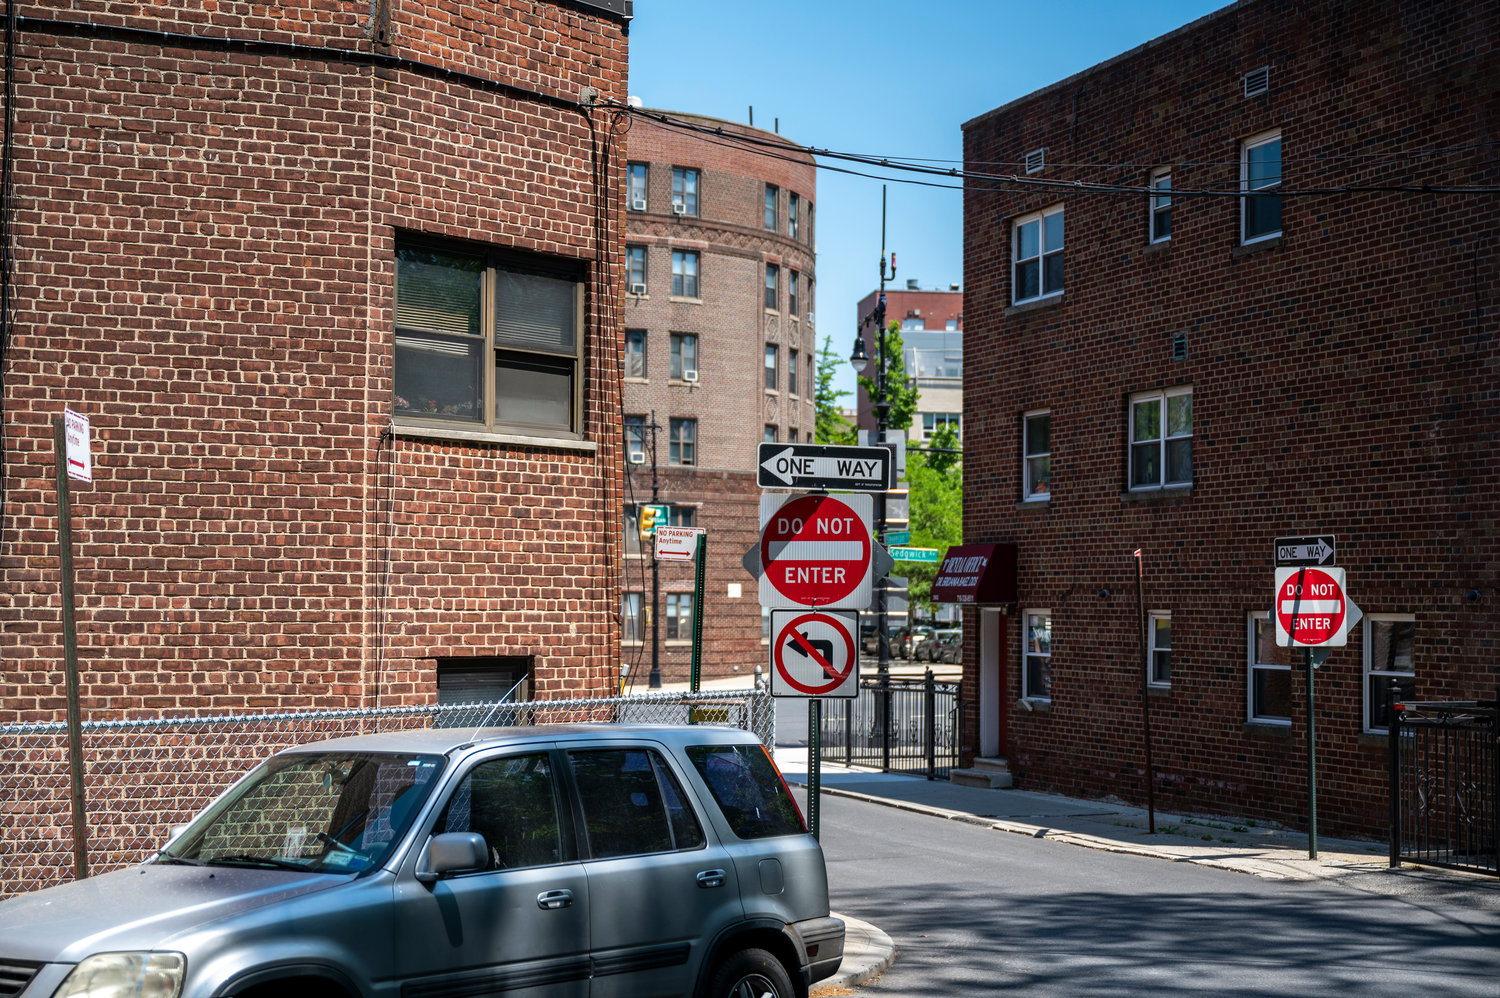 There was once a yellow caution light at the Stevenson Place and Van Cortlandt Avenue West intersection, but it hasn’t been replaced. One Van Cortlandt Village neighbor hopes it will be reinstalled, along with his other requests for additional traffic safety measures.